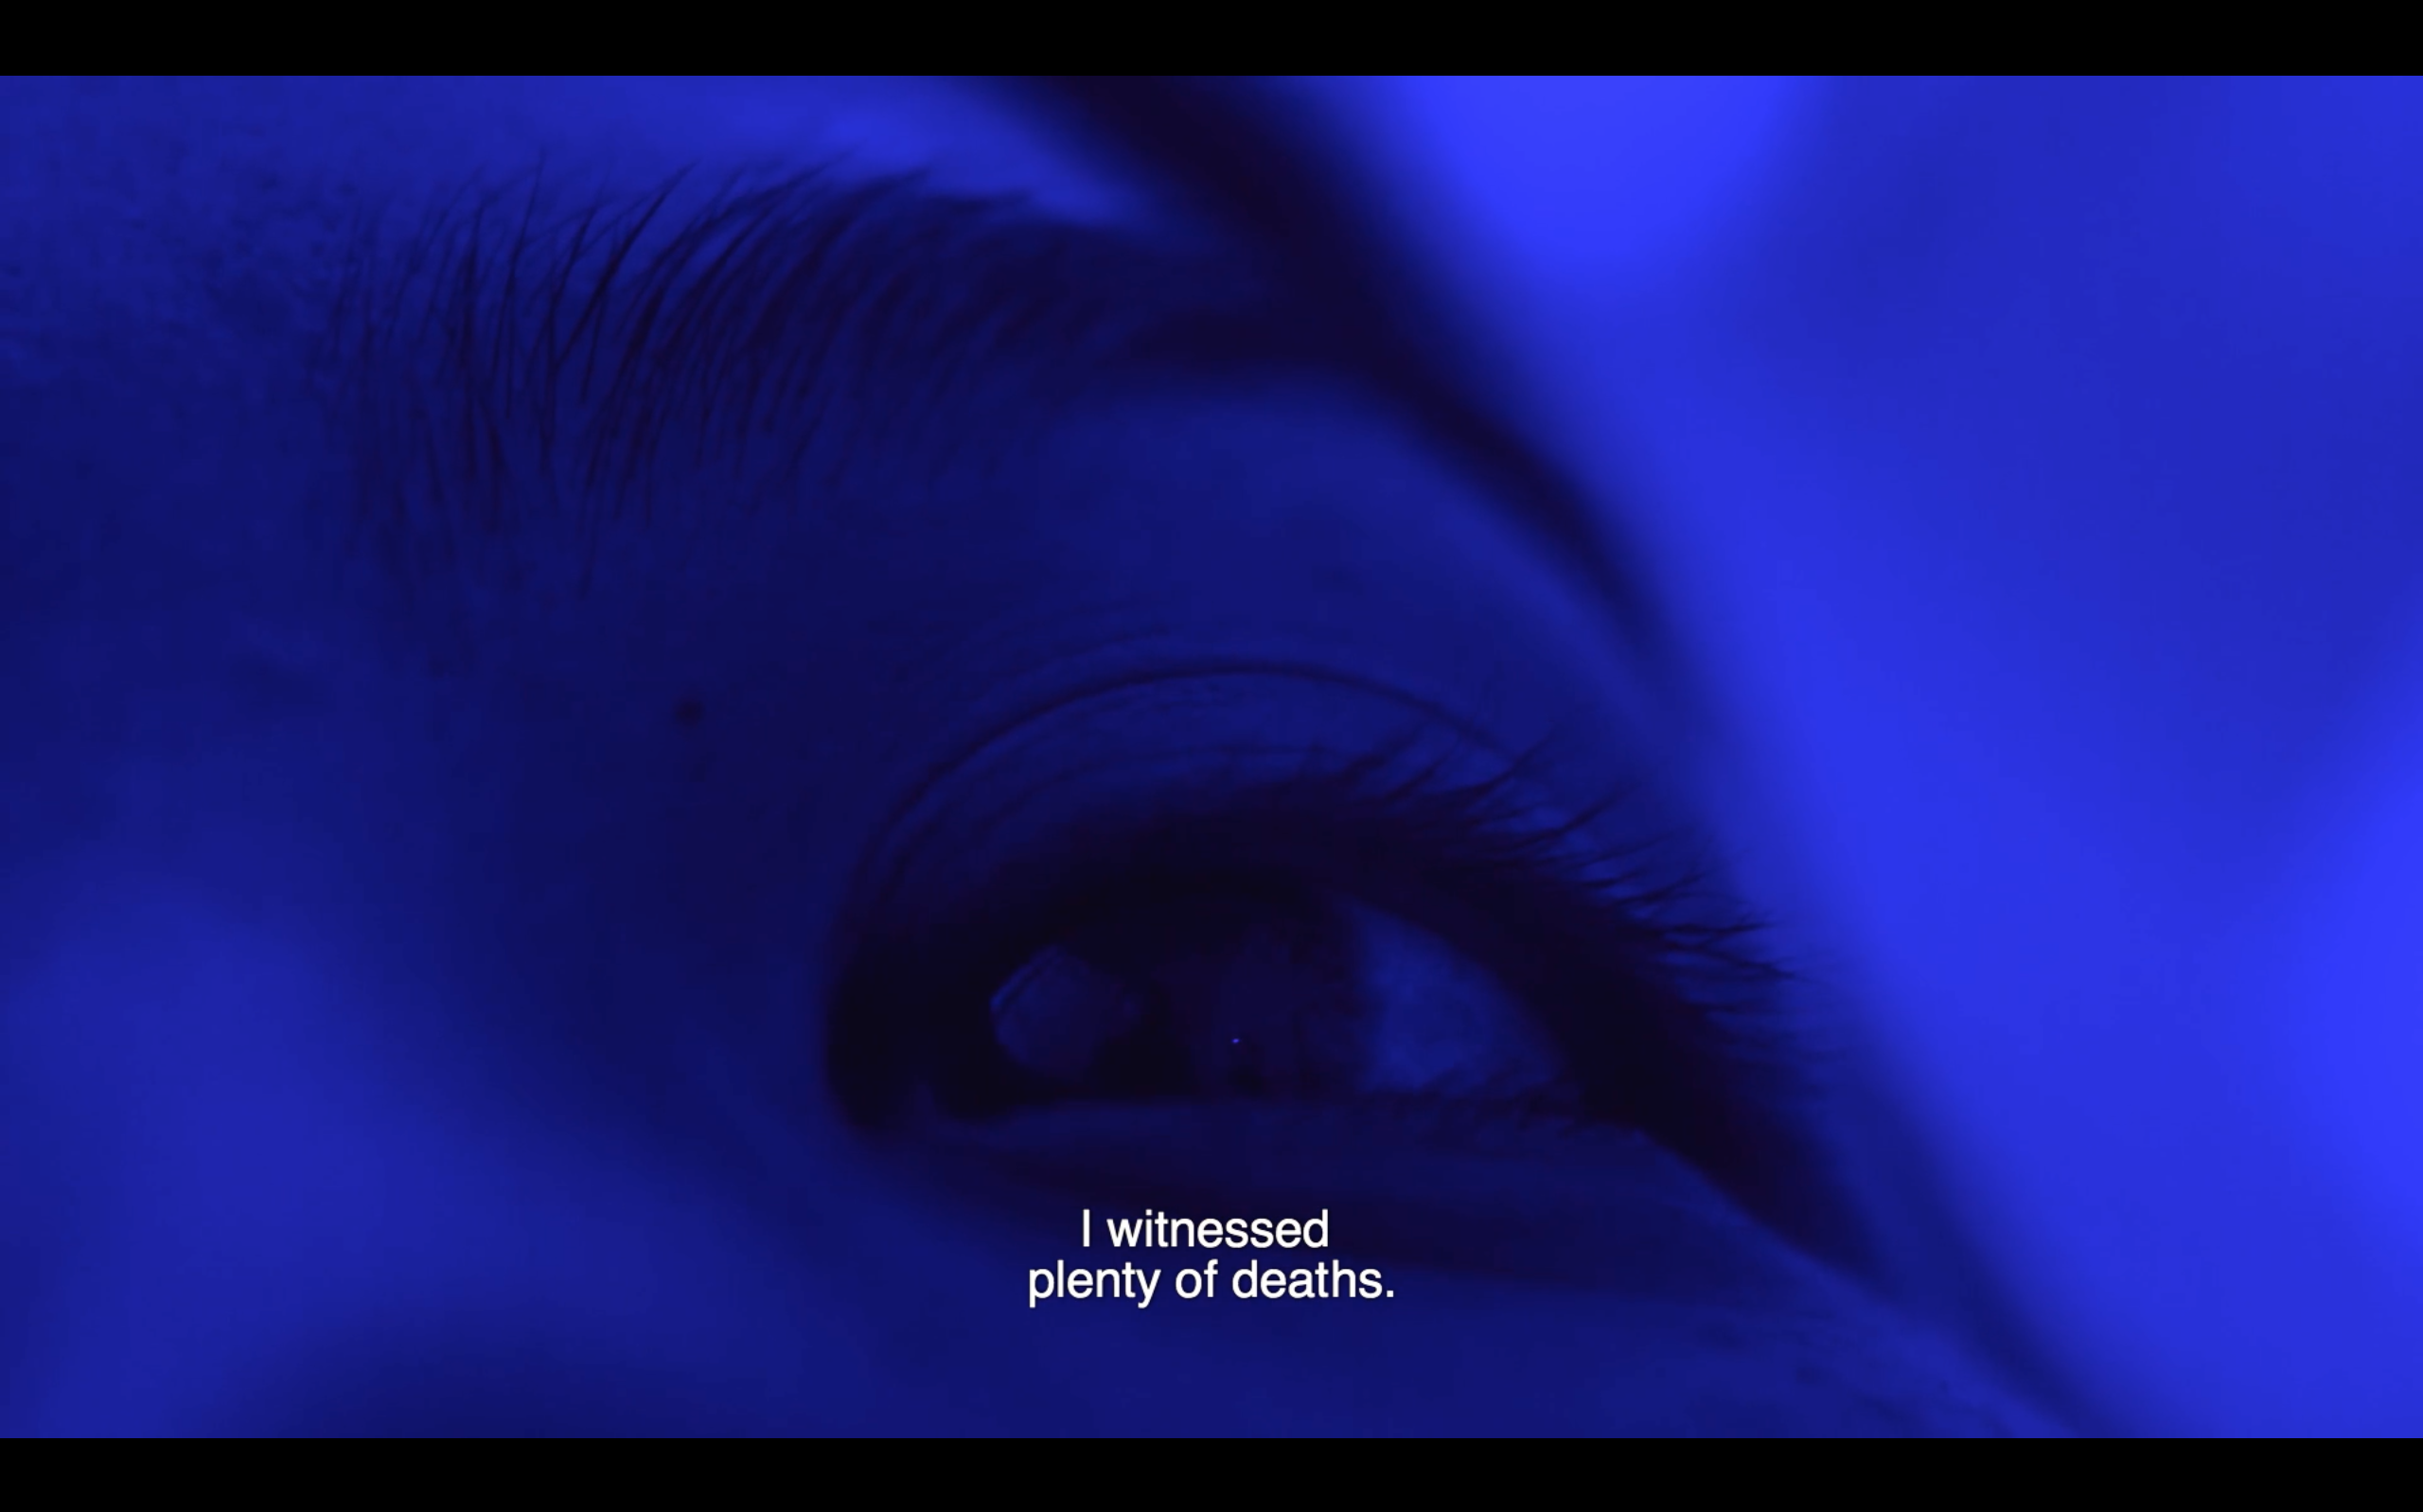 Filmstill by artist Thuy-Han Nguyen-Chi, from the film 'The In/Extinguishable Fire'. Close up of an eye, all in blue with the caption 'I witnessed plenty of deaths'.